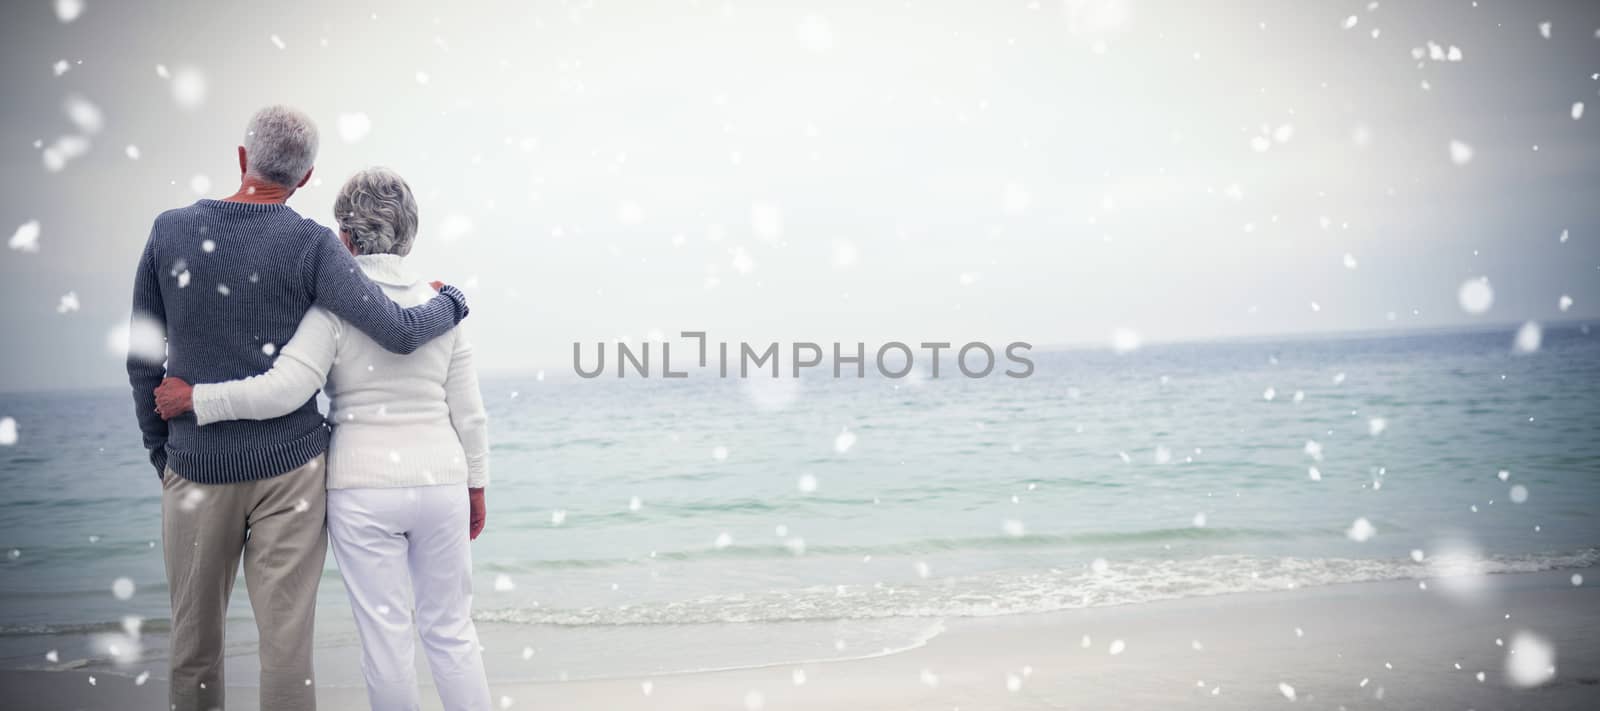 Snow falling against rear view of senior couple embracing at beach